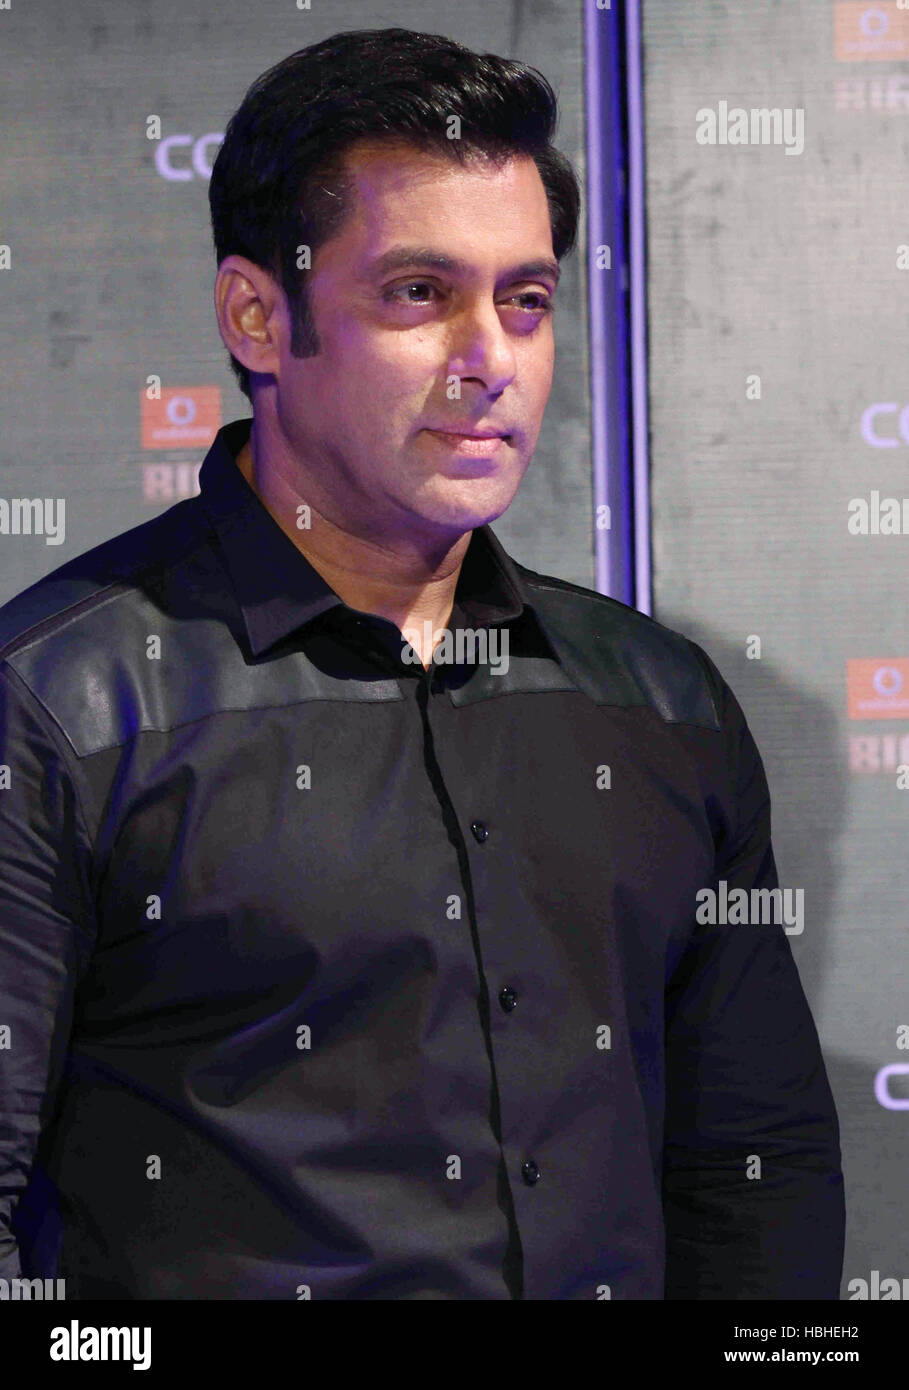 Bollywood actor Salman Khan during the press conference to announce launch of Big Boss season 7 in Mumbai, India Stock Photo